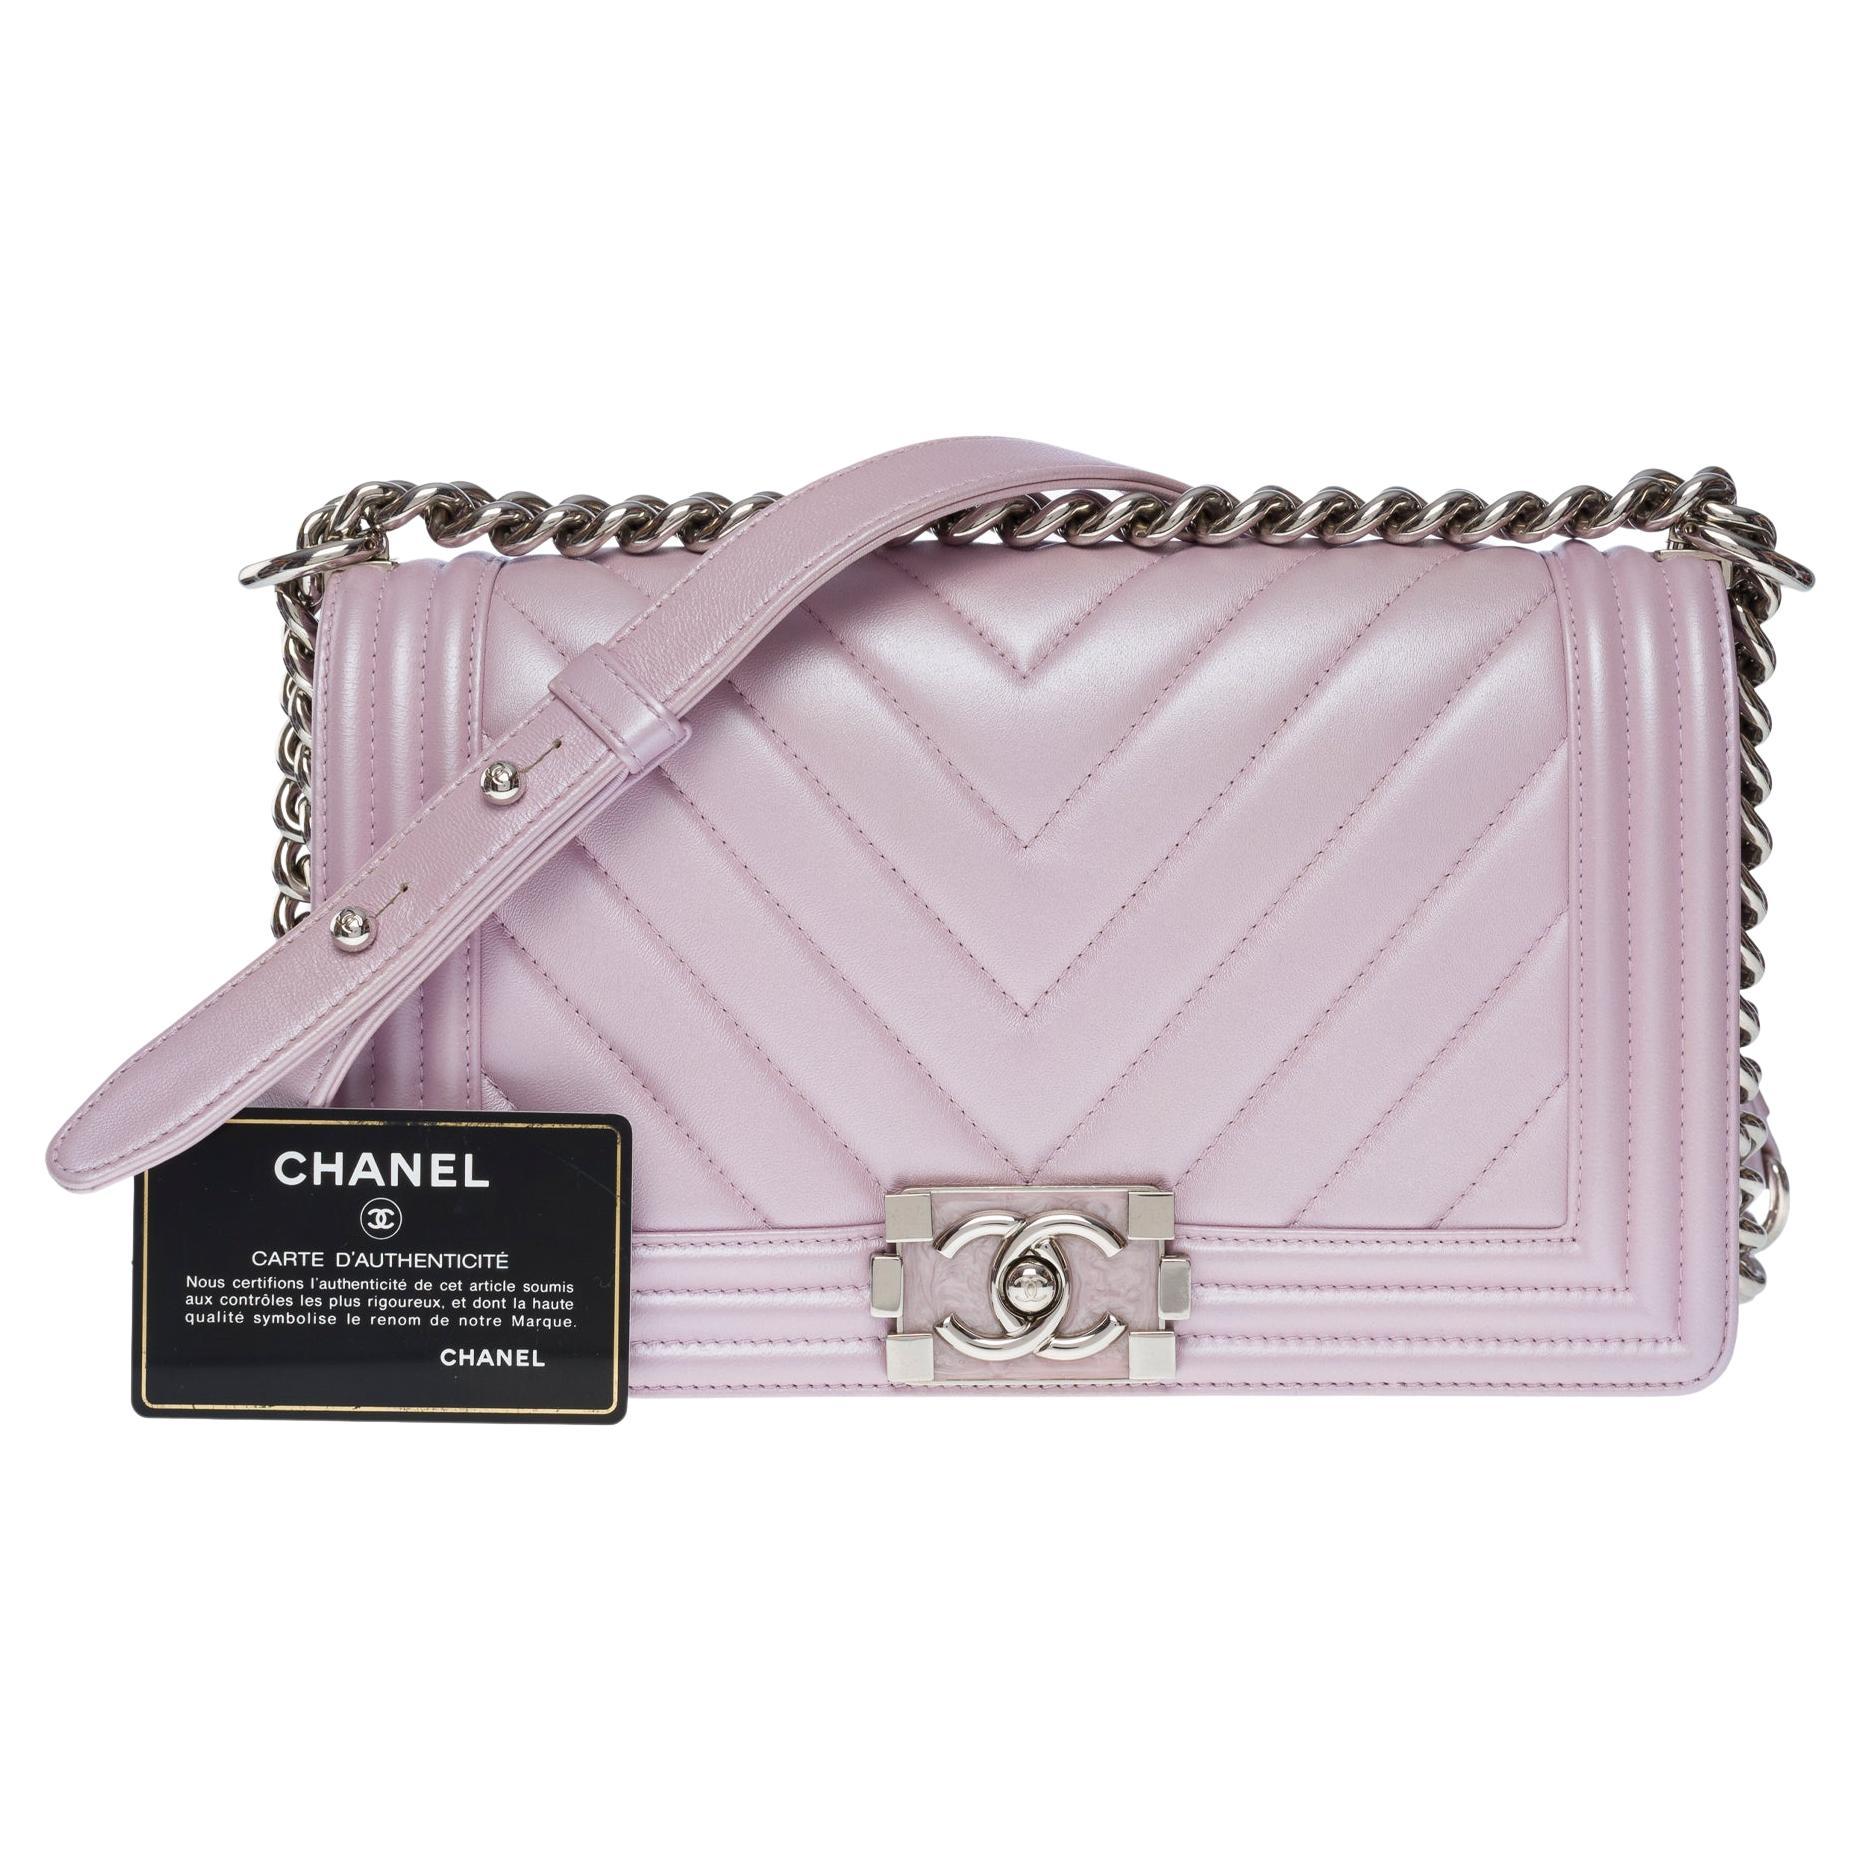 Chanel Boy Old Medium shoulder bag in lilac quilted herringbone leather, SHW For Sale